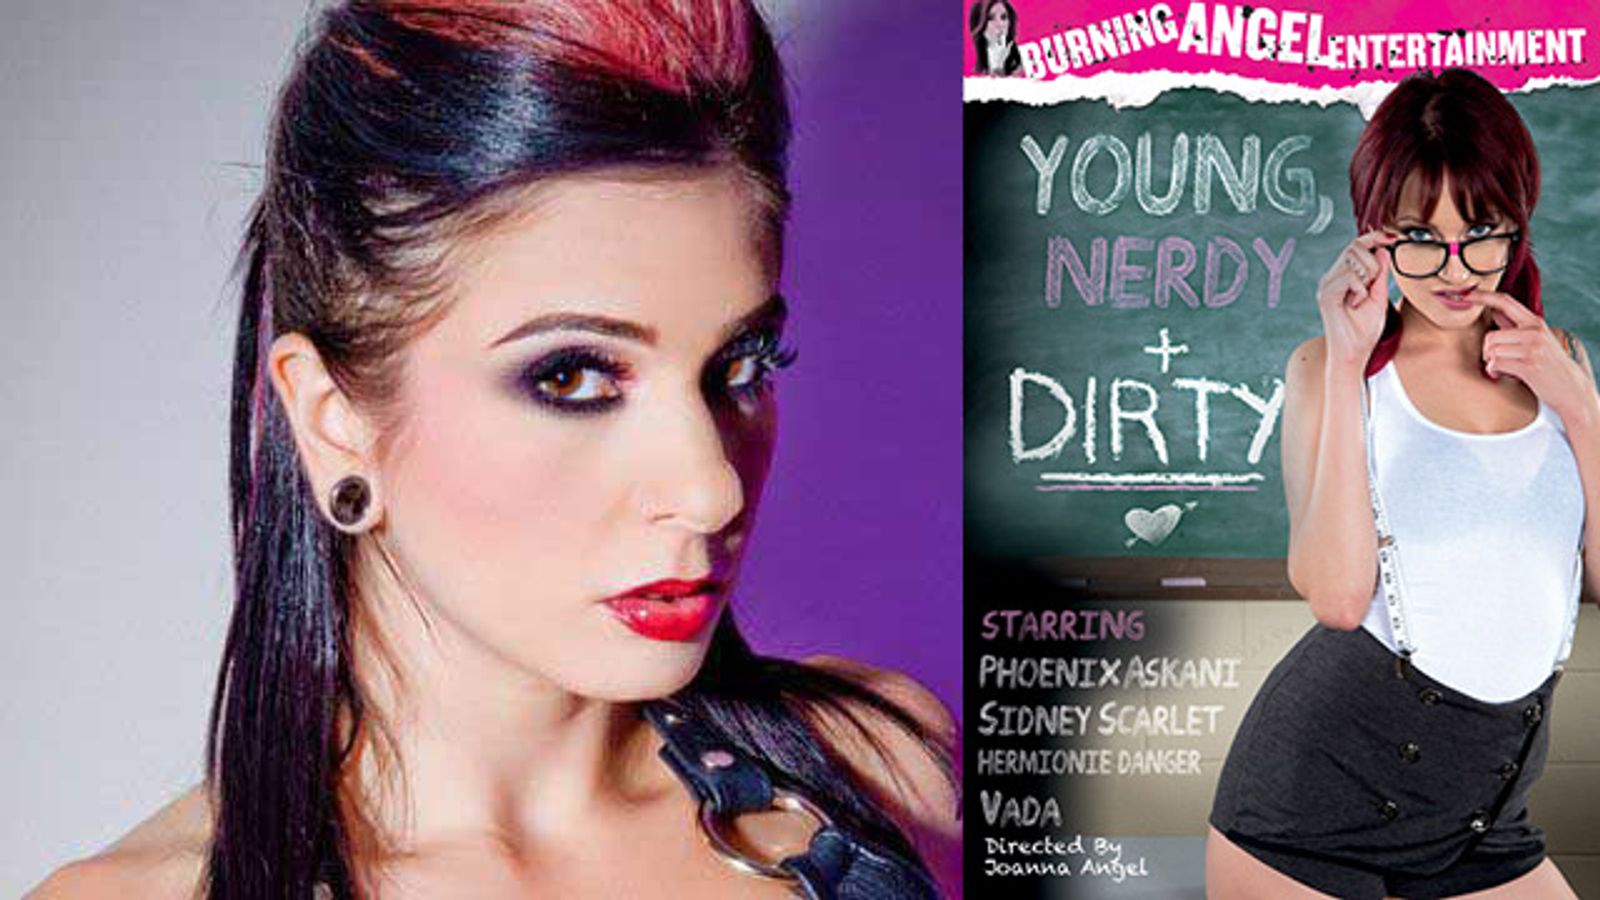 Burning Angel’s ‘Young, Nerdy, & Dirty’ Is A Geek’s Wet Dream